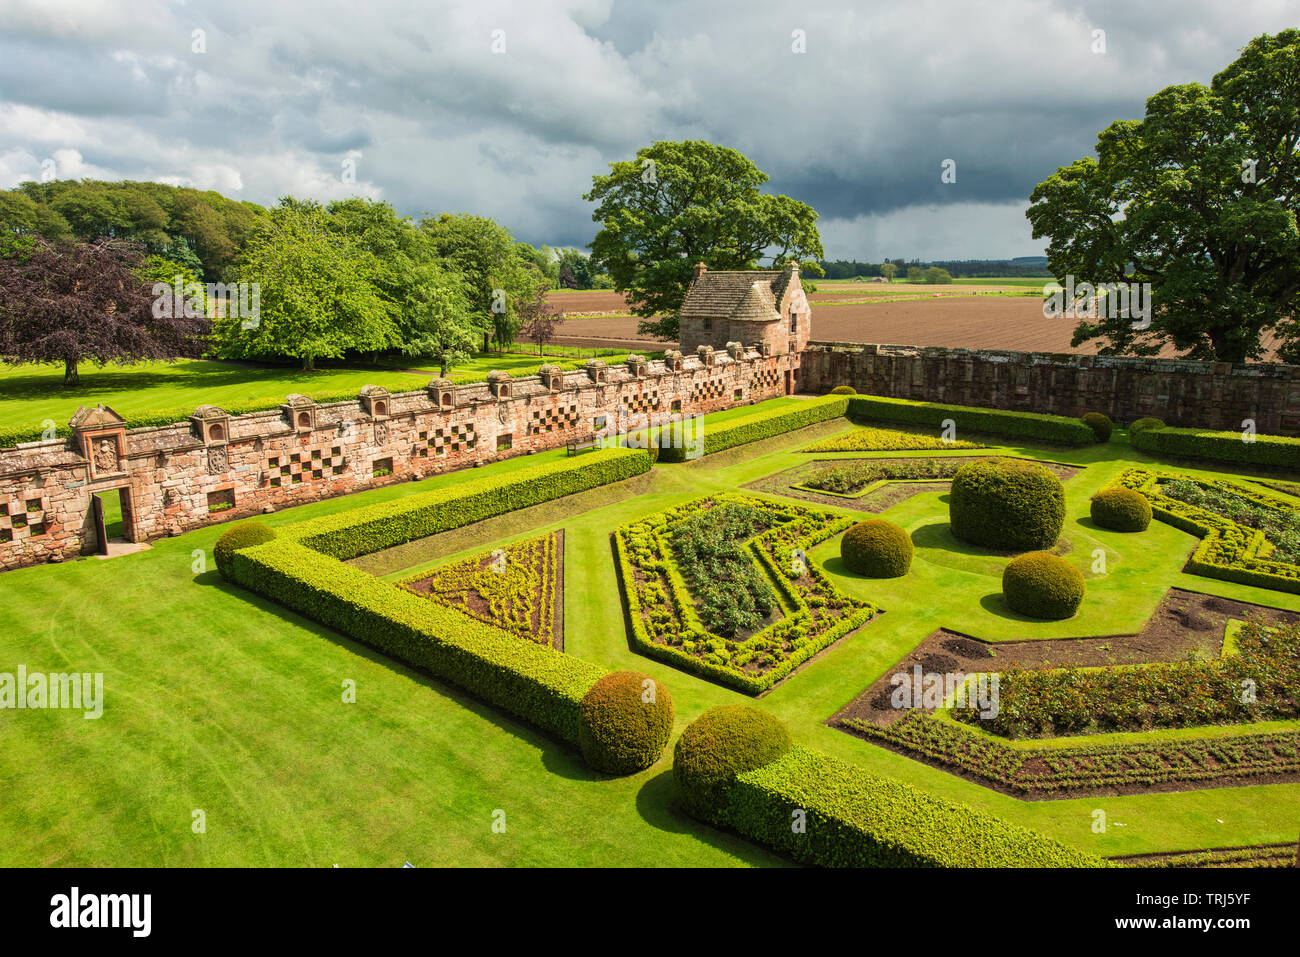 Edzell Castle, Angus, Scotland. The elaborate walled garden was created in 1604. Stock Photo